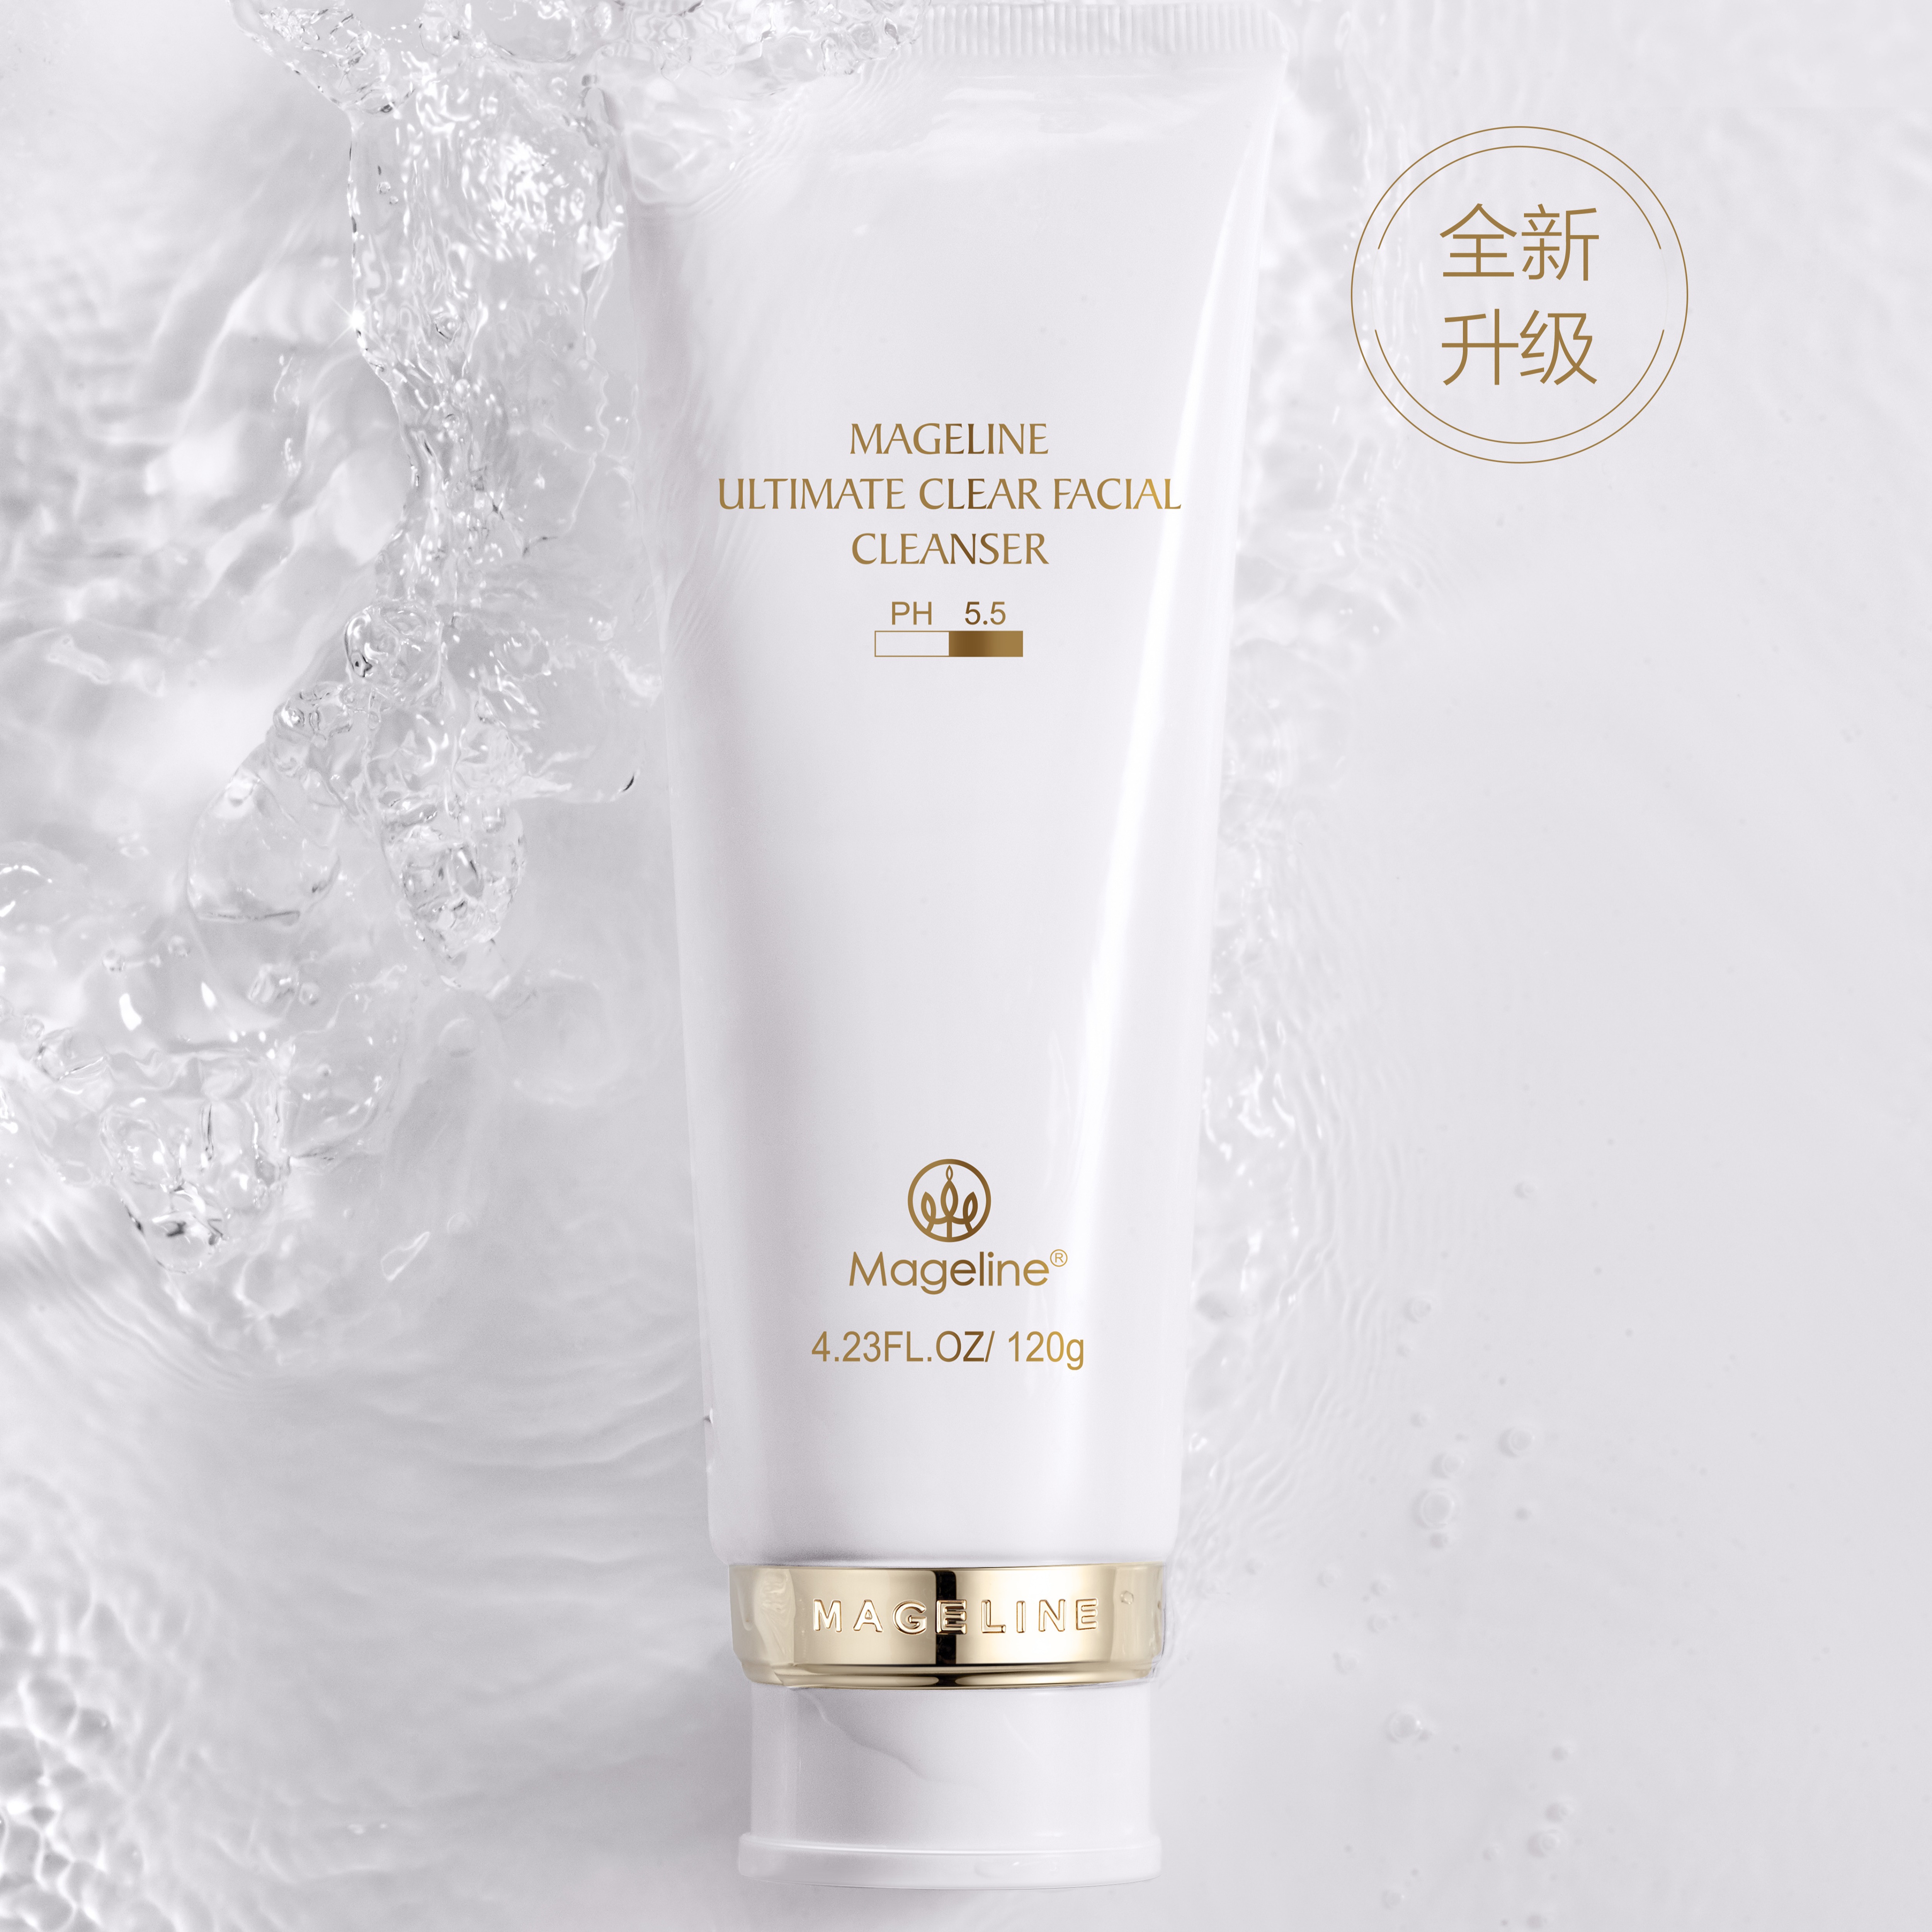 Mageline Ultimate Clear Facial PH5.5 Cleanser